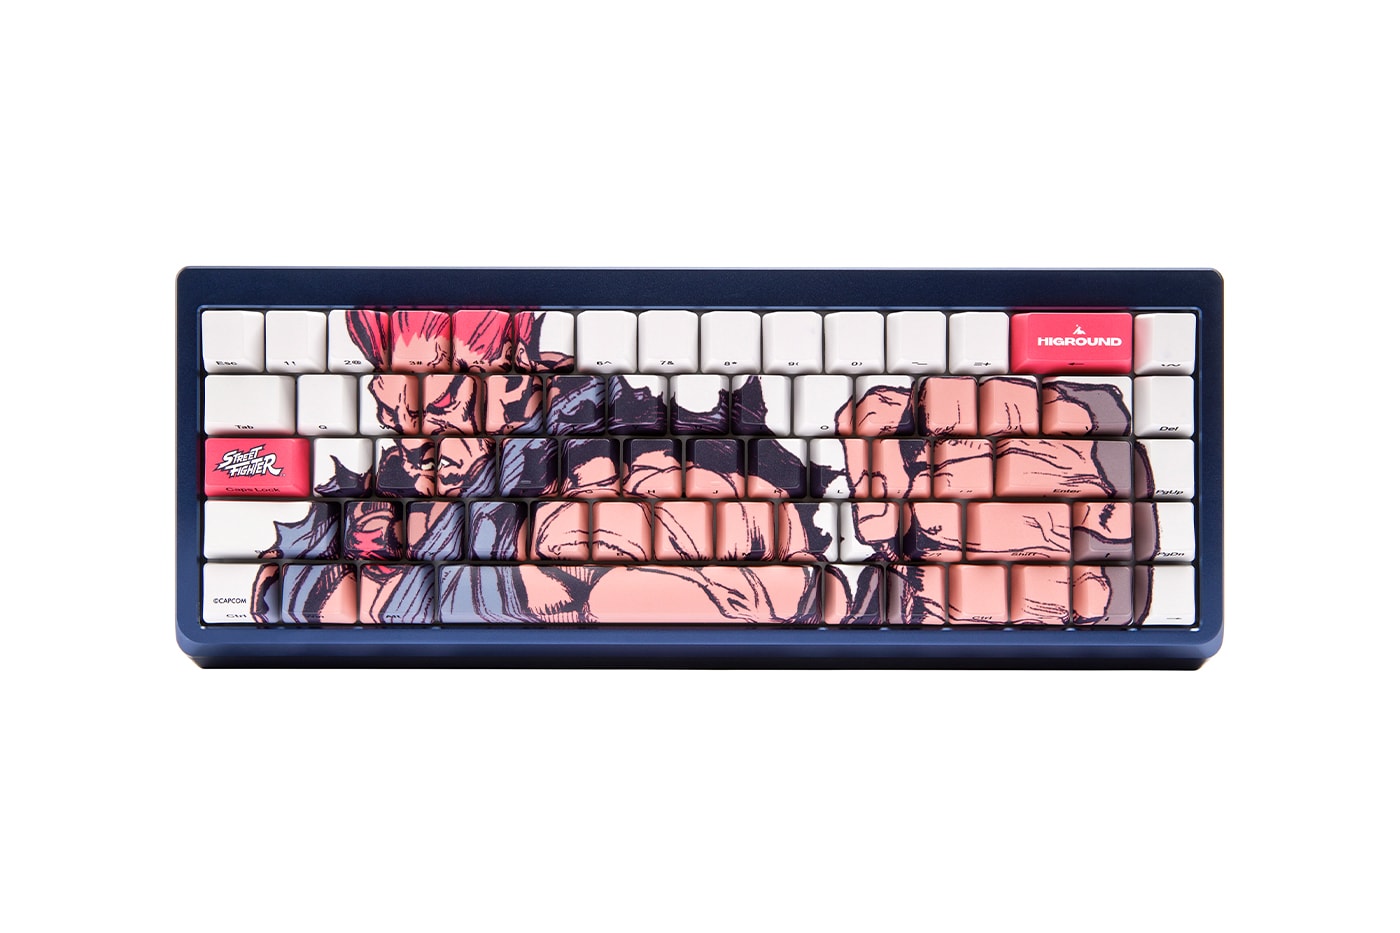 Higround Street Fighter basecamp 65 keyboard keycaps mouspad jellybag apparel Collaboration fighting game april 19 